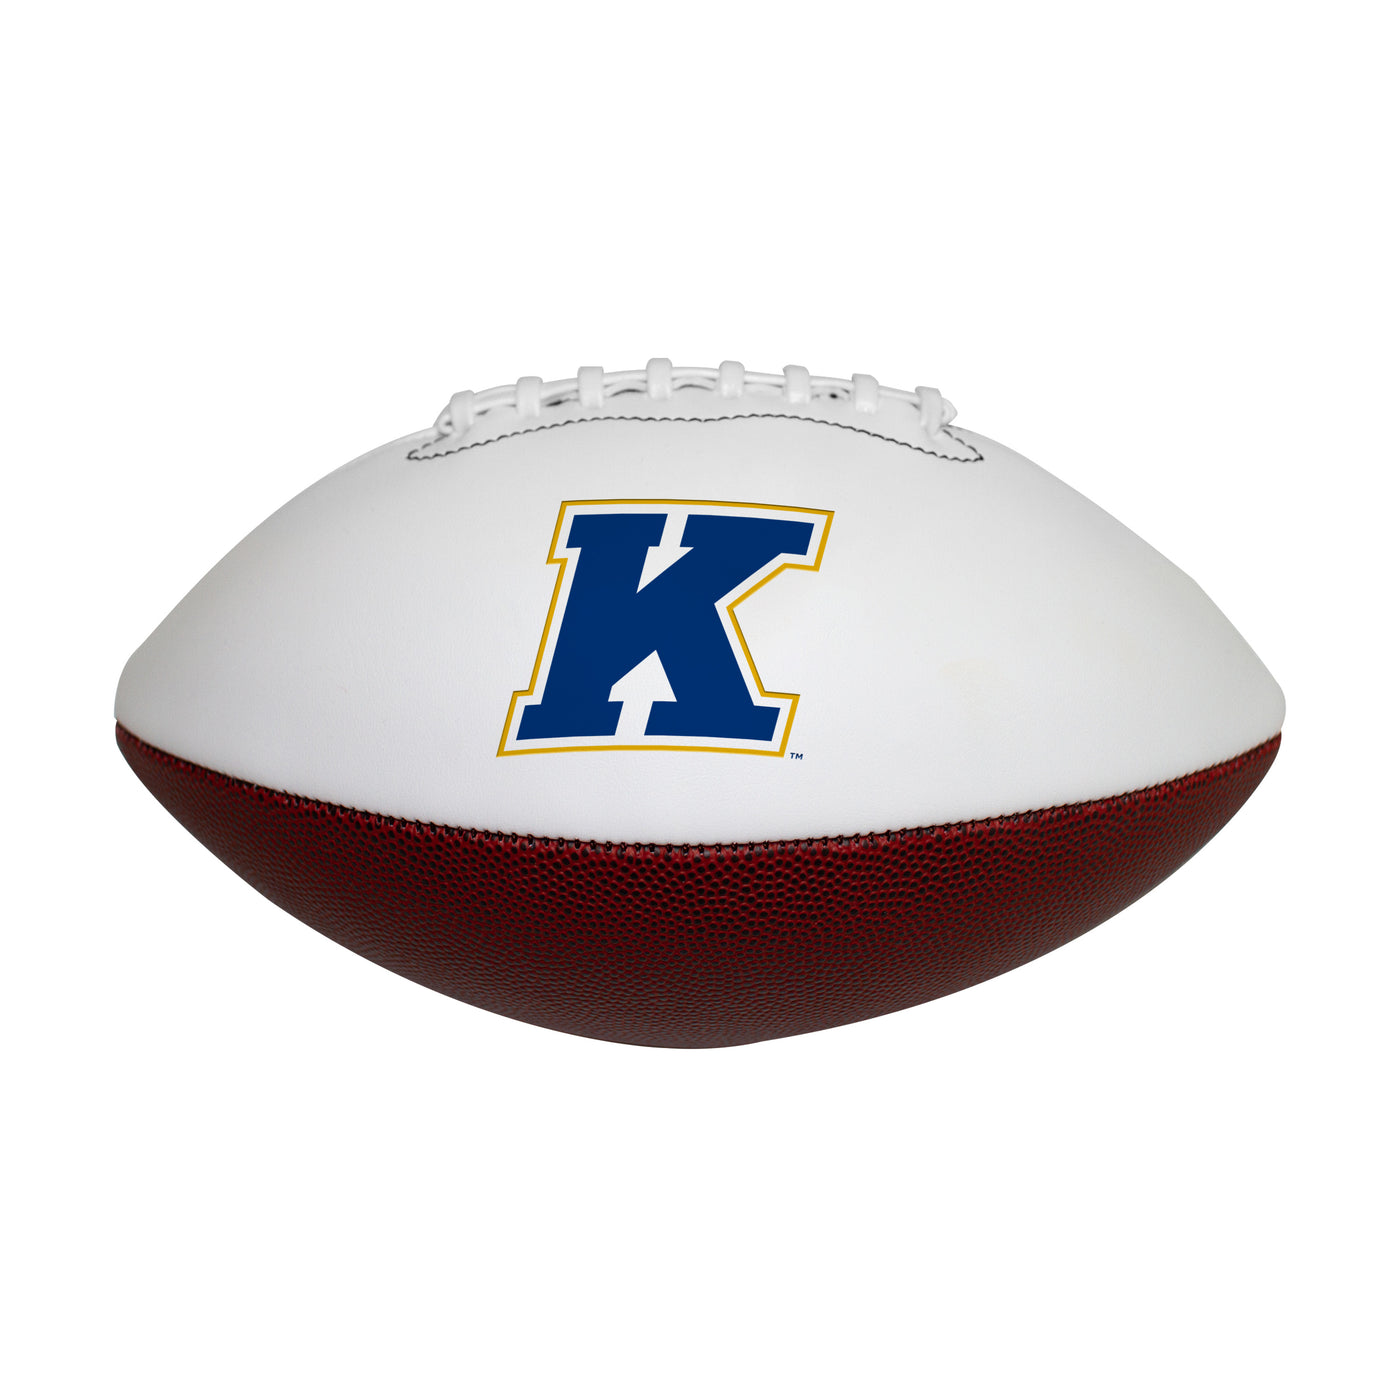 Kent State Official-Size Autograph Football